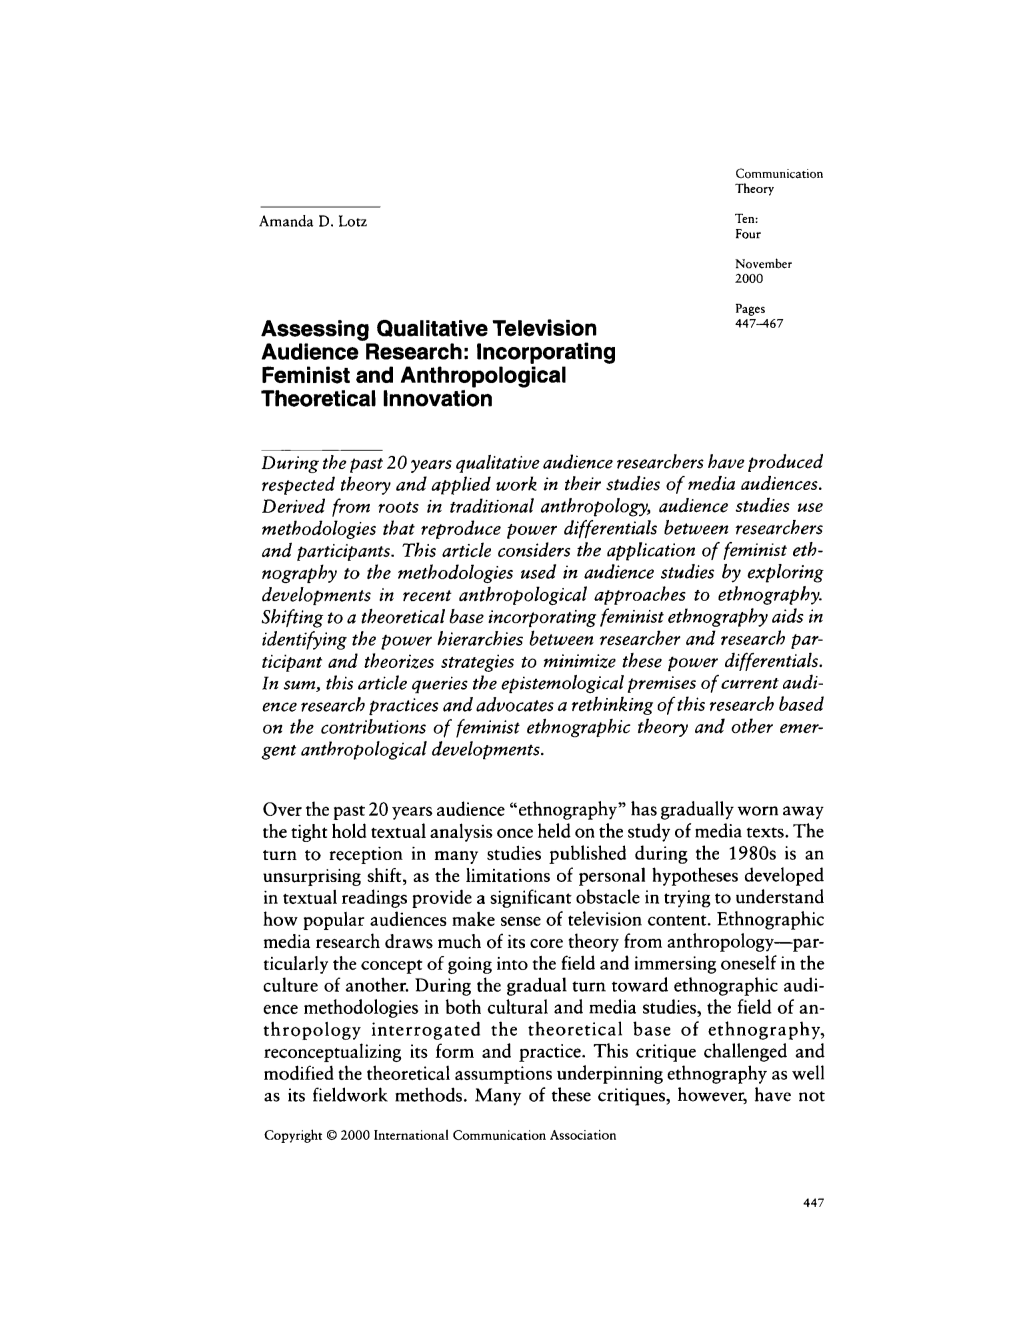 Assessing Qualitative Television Audience Research: Incorporating